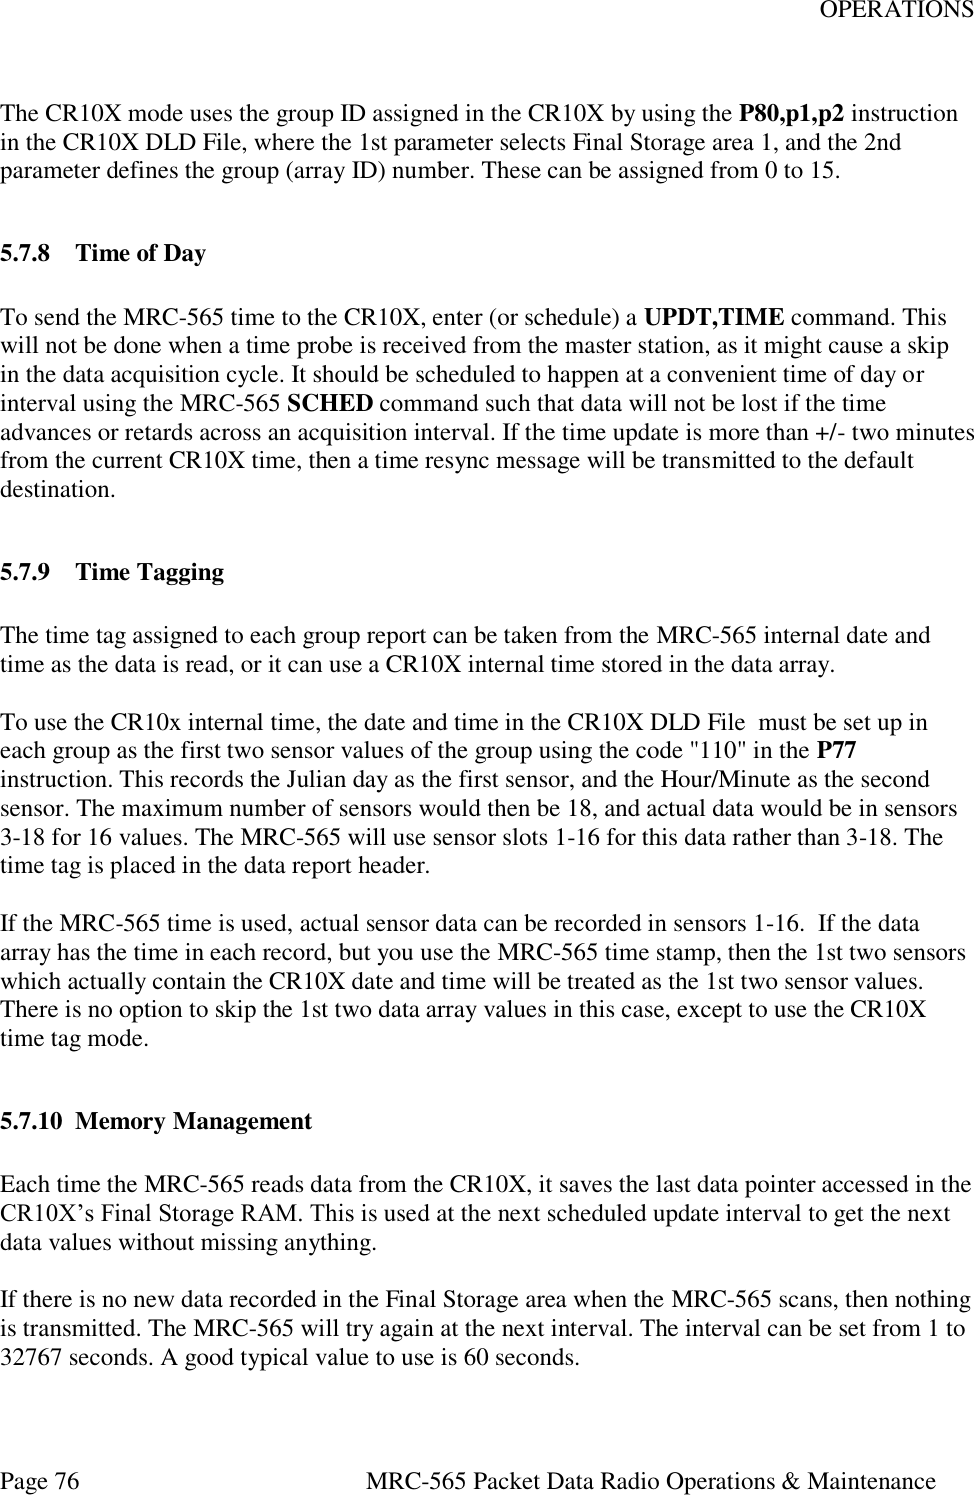 OPERATIONS Page 76  MRC-565 Packet Data Radio Operations &amp; Maintenance  The CR10X mode uses the group ID assigned in the CR10X by using the P80,p1,p2 instruction  in the CR10X DLD File, where the 1st parameter selects Final Storage area 1, and the 2nd parameter defines the group (array ID) number. These can be assigned from 0 to 15.  5.7.8 Time of Day  To send the MRC-565 time to the CR10X, enter (or schedule) a UPDT,TIME command. This will not be done when a time probe is received from the master station, as it might cause a skip in the data acquisition cycle. It should be scheduled to happen at a convenient time of day or interval using the MRC-565 SCHED command such that data will not be lost if the time advances or retards across an acquisition interval. If the time update is more than +/- two minutes from the current CR10X time, then a time resync message will be transmitted to the default destination.  5.7.9 Time Tagging  The time tag assigned to each group report can be taken from the MRC-565 internal date and time as the data is read, or it can use a CR10X internal time stored in the data array.   To use the CR10x internal time, the date and time in the CR10X DLD File  must be set up in each group as the first two sensor values of the group using the code &quot;110&quot; in the P77 instruction. This records the Julian day as the first sensor, and the Hour/Minute as the second sensor. The maximum number of sensors would then be 18, and actual data would be in sensors 3-18 for 16 values. The MRC-565 will use sensor slots 1-16 for this data rather than 3-18. The time tag is placed in the data report header.   If the MRC-565 time is used, actual sensor data can be recorded in sensors 1-16.  If the data array has the time in each record, but you use the MRC-565 time stamp, then the 1st two sensors which actually contain the CR10X date and time will be treated as the 1st two sensor values. There is no option to skip the 1st two data array values in this case, except to use the CR10X time tag mode.  5.7.10 Memory Management  Each time the MRC-565 reads data from the CR10X, it saves the last data pointer accessed in the CR10X’s Final Storage RAM. This is used at the next scheduled update interval to get the next data values without missing anything.  If there is no new data recorded in the Final Storage area when the MRC-565 scans, then nothing is transmitted. The MRC-565 will try again at the next interval. The interval can be set from 1 to 32767 seconds. A good typical value to use is 60 seconds.   